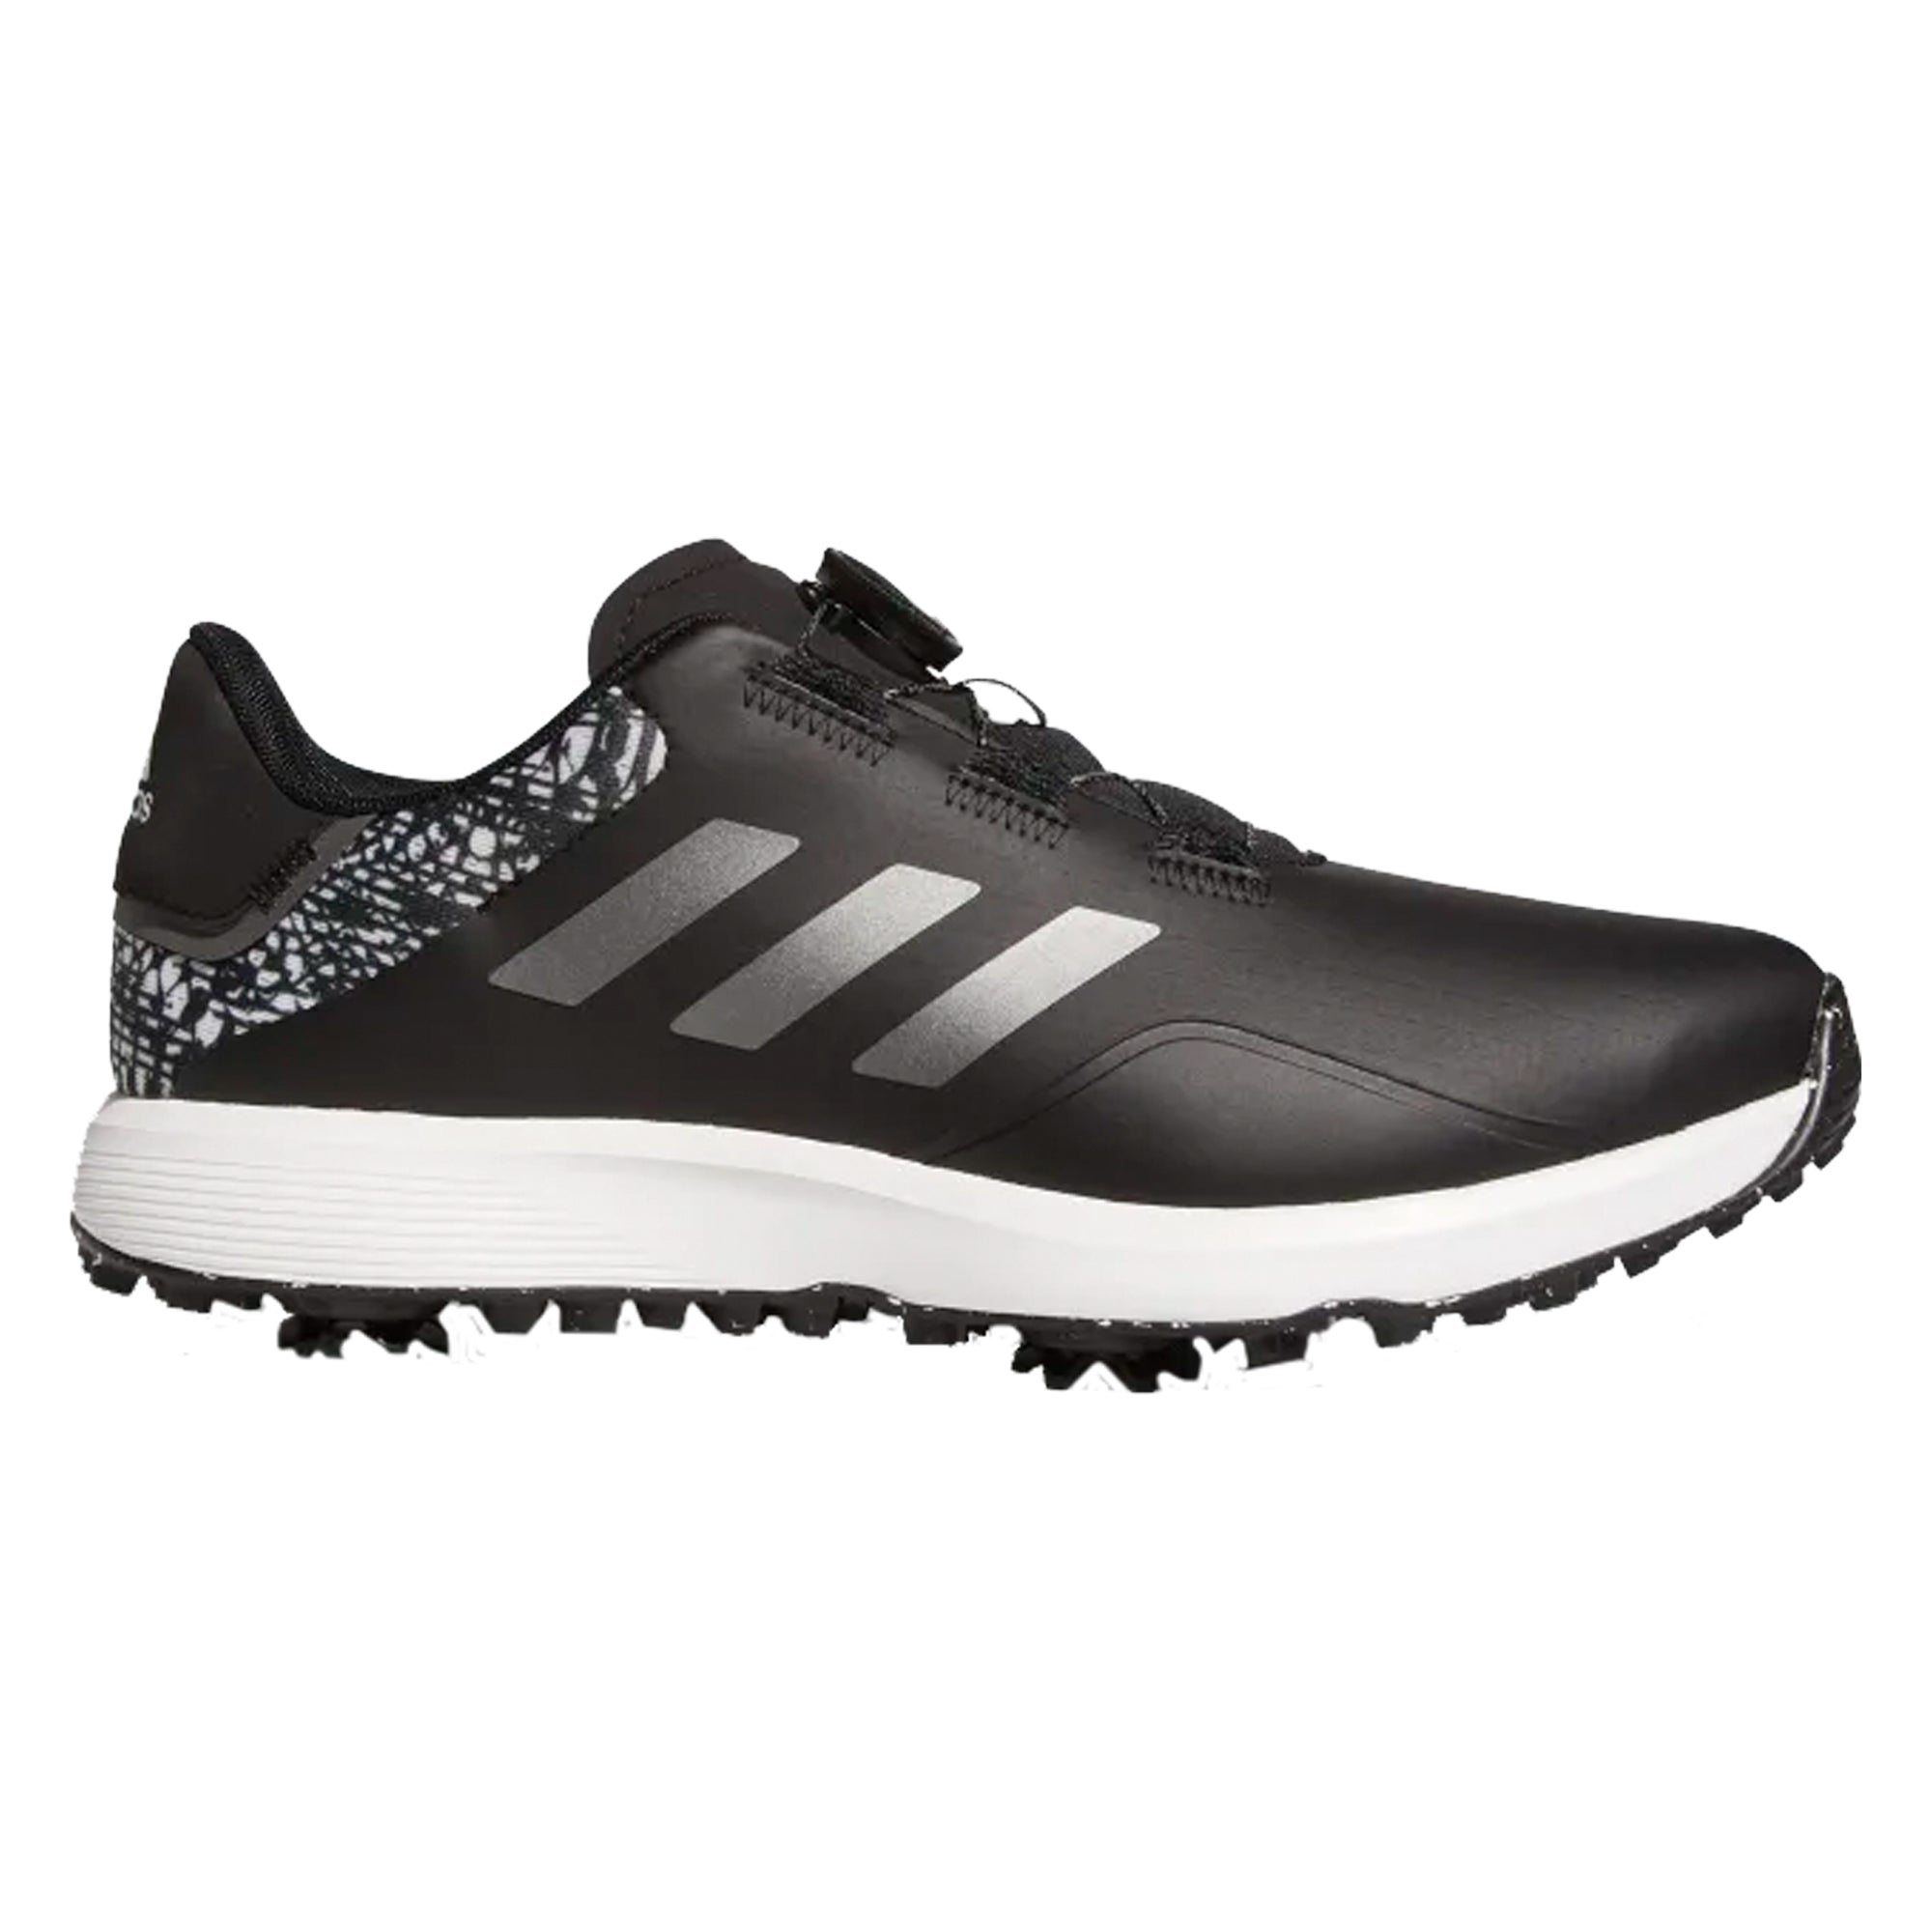 Adidas S2G BOA Wide Golf Shoes